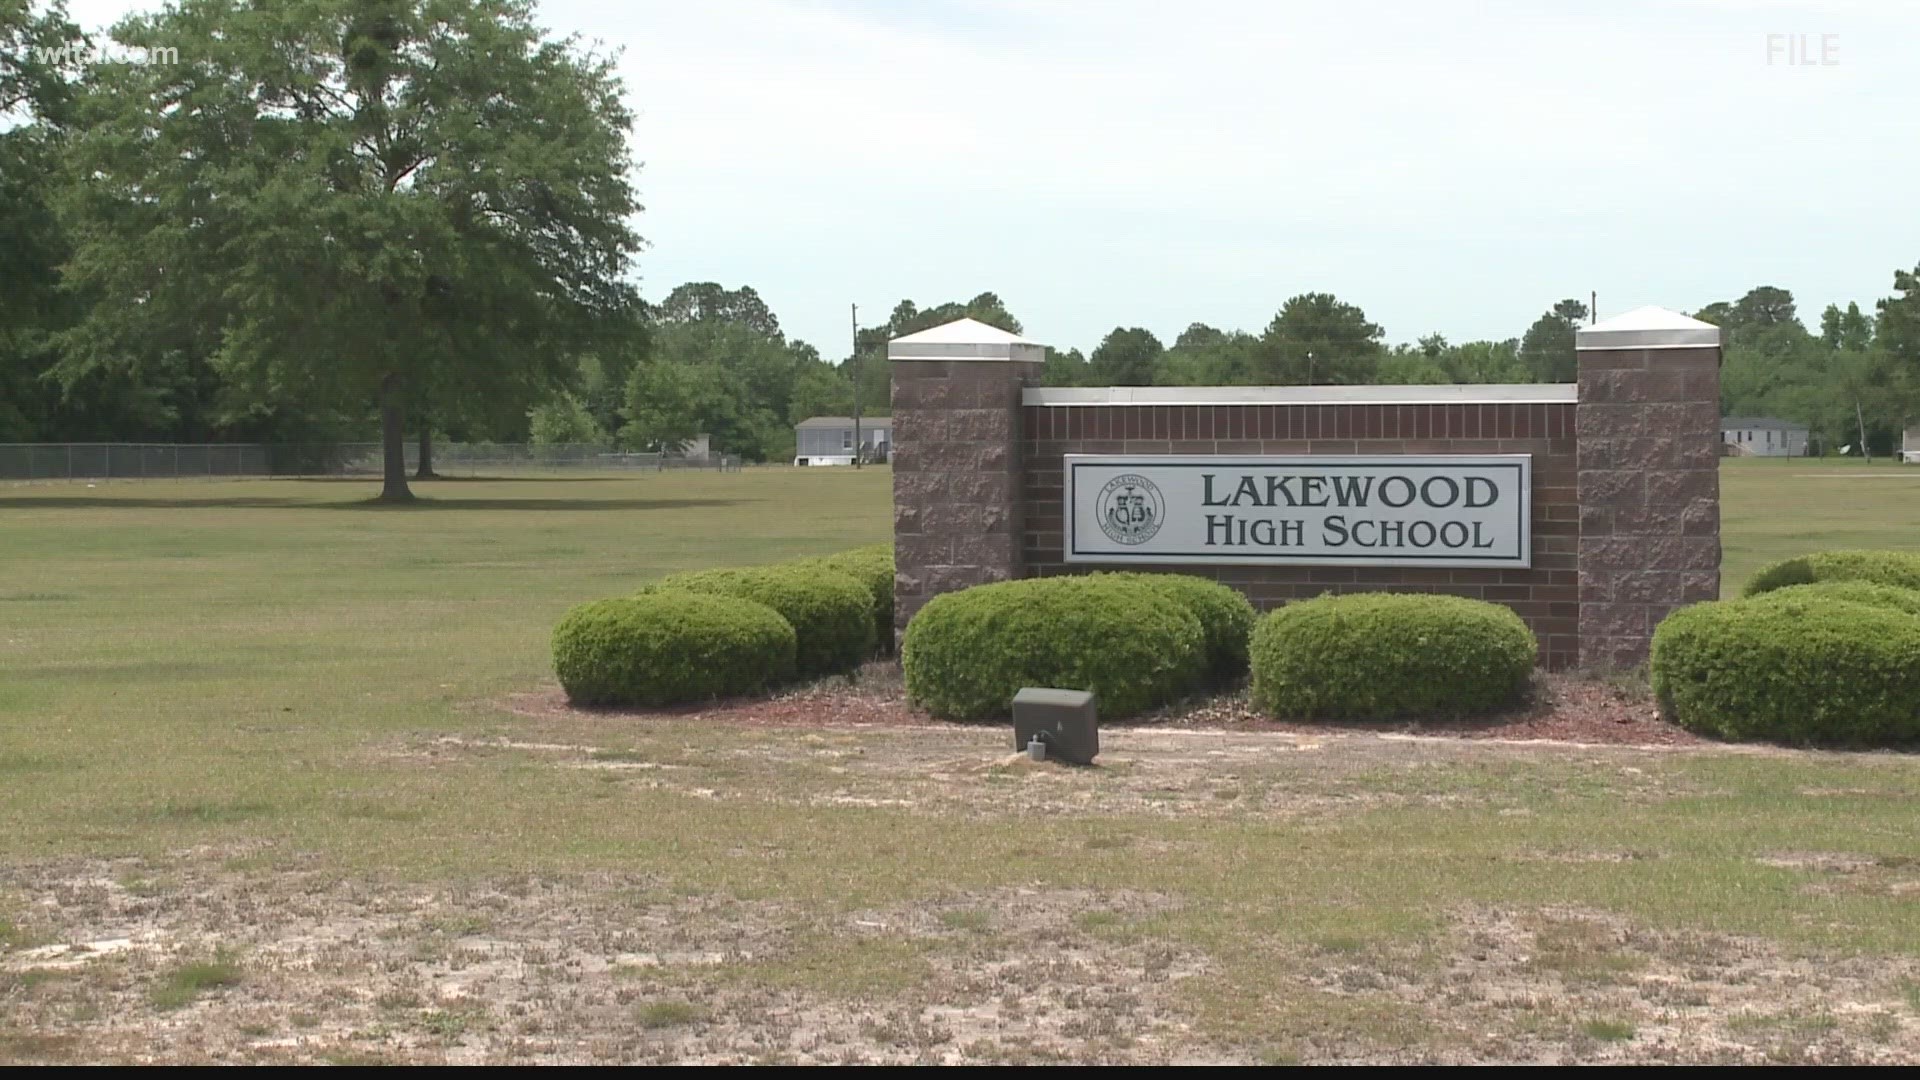 Peter Calhoun, 57 was arrested on Friday.  He worked at Lakewood High School.